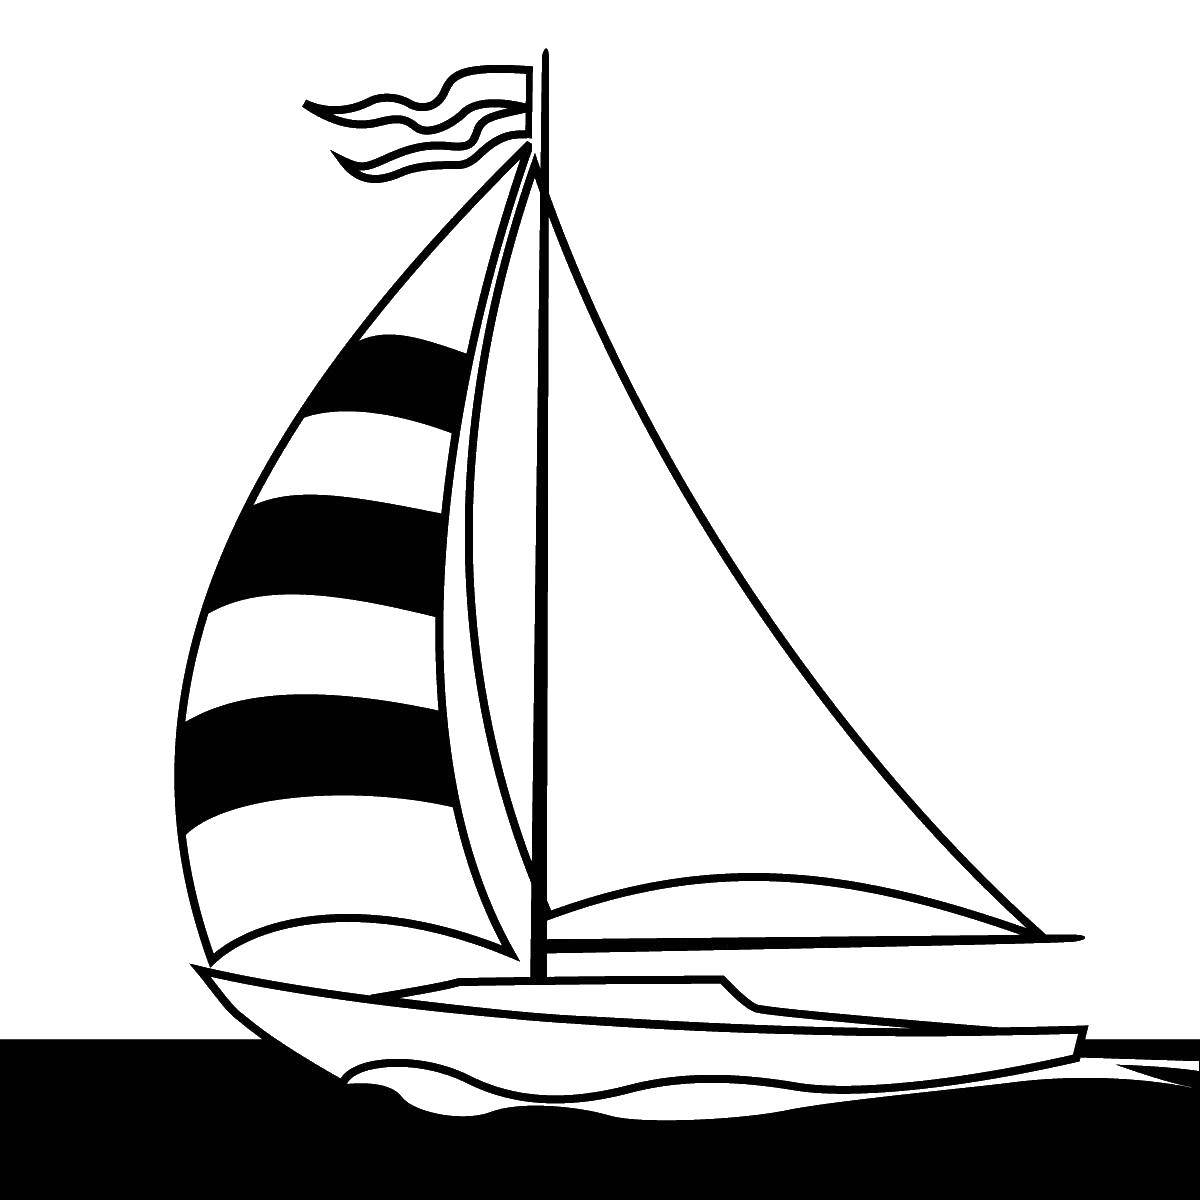 Coloring Striped sail. Category ship. Tags:  Ship, water.